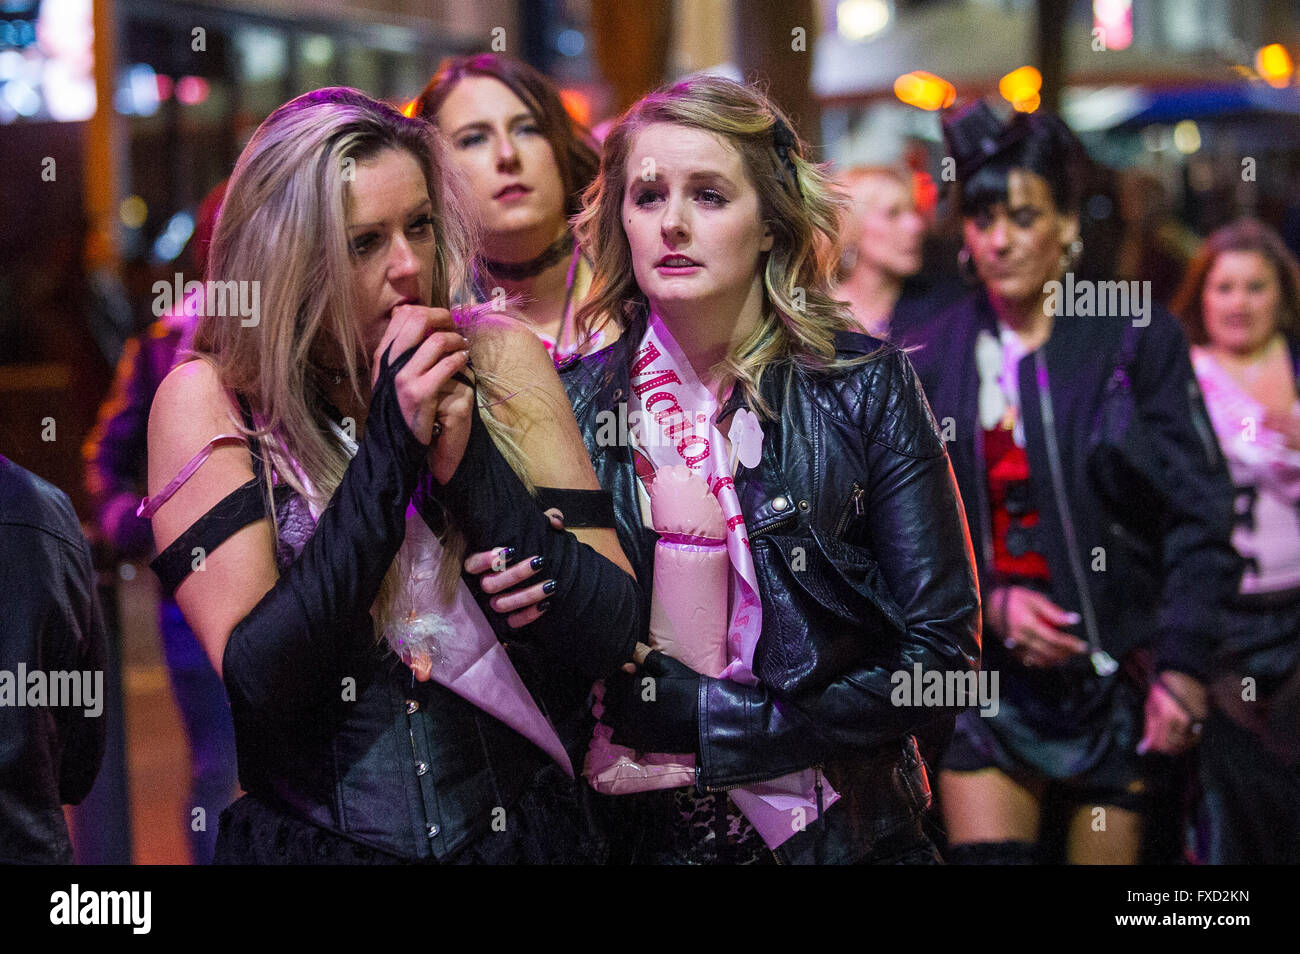 Women on a night out on Broad Street in Birmingham on a Saturday. Stock Photo